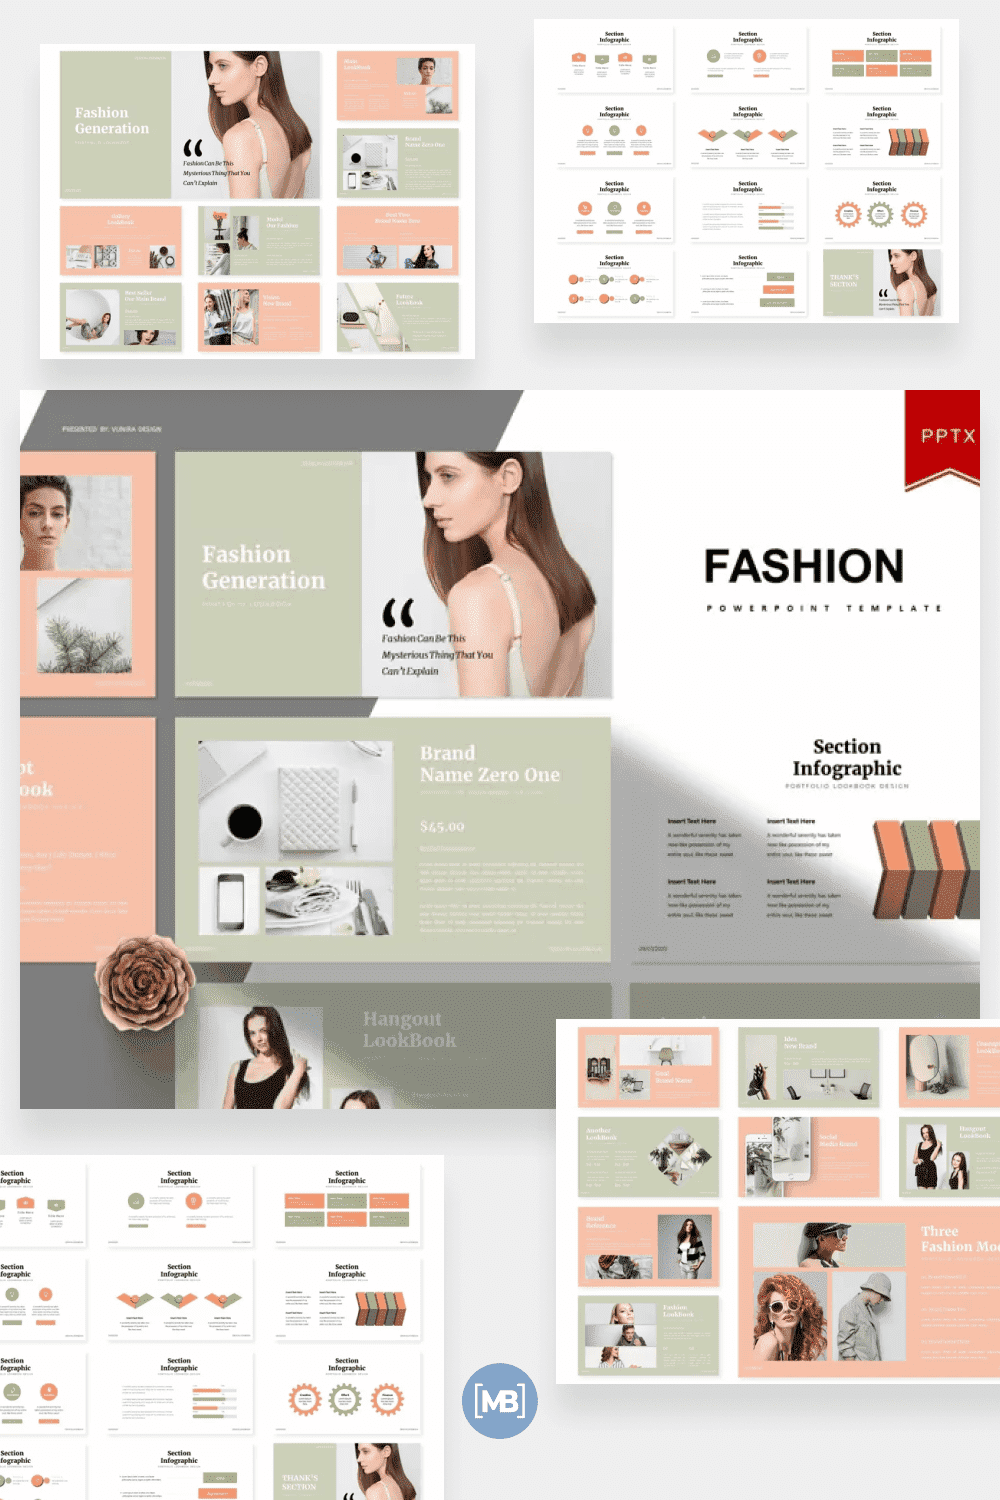 Fashion generation - PowerPoint template.